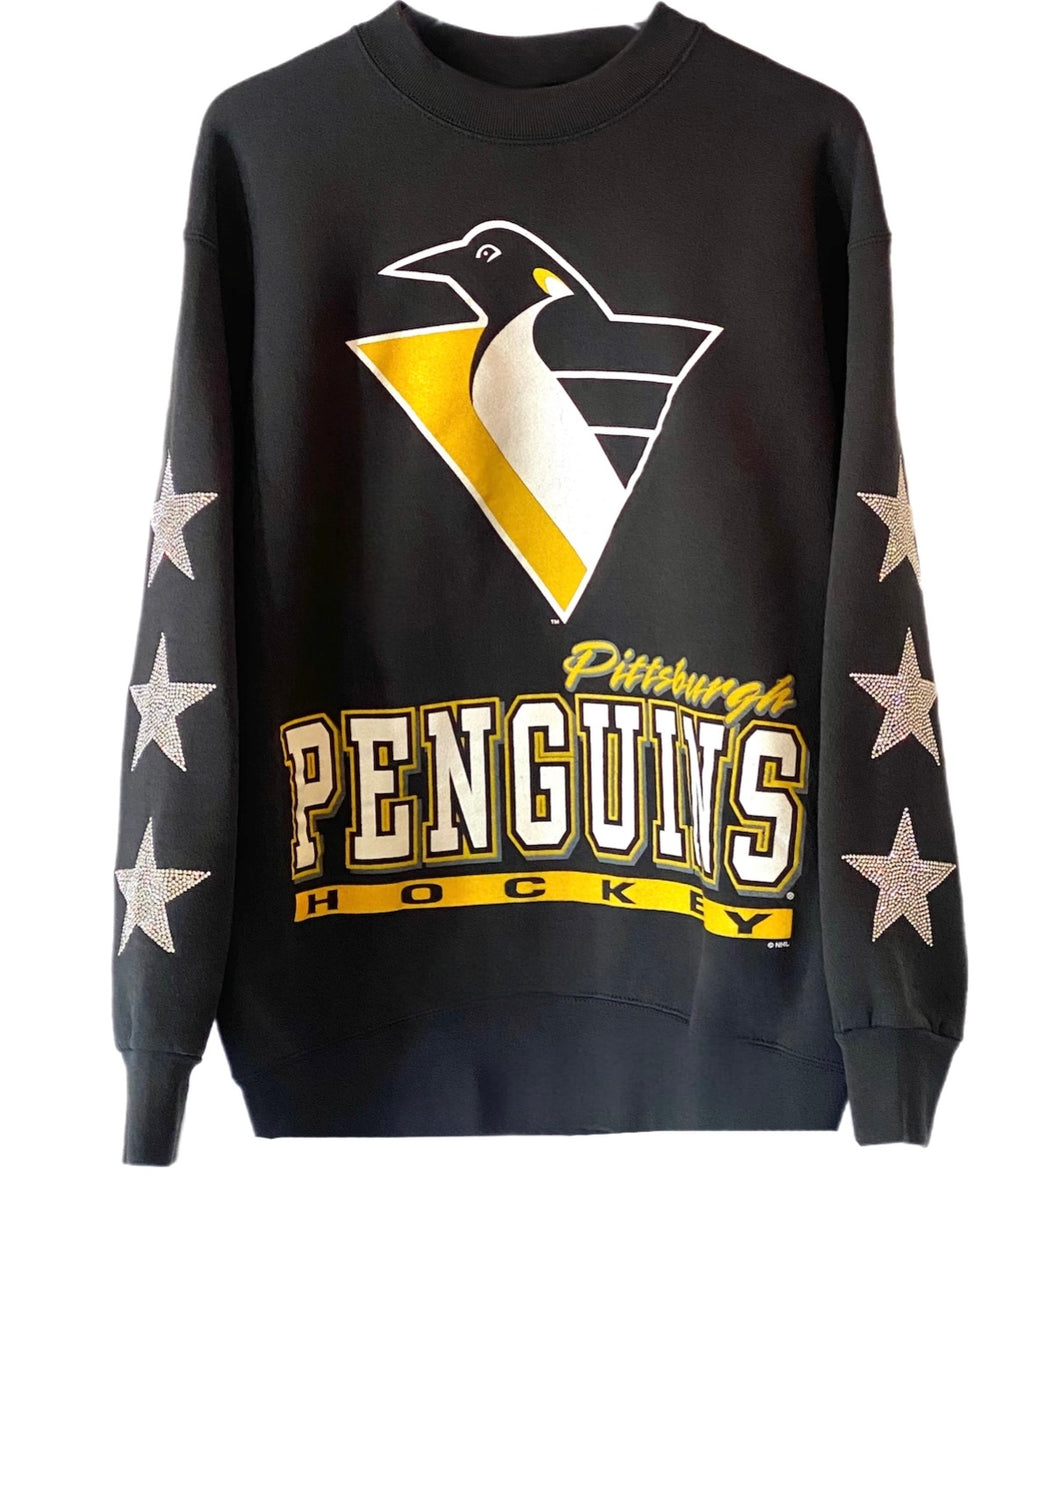 Pittsburgh Penguins, NHL One of a KIND Vintage Sweatshirt with Three Crystal Star Design